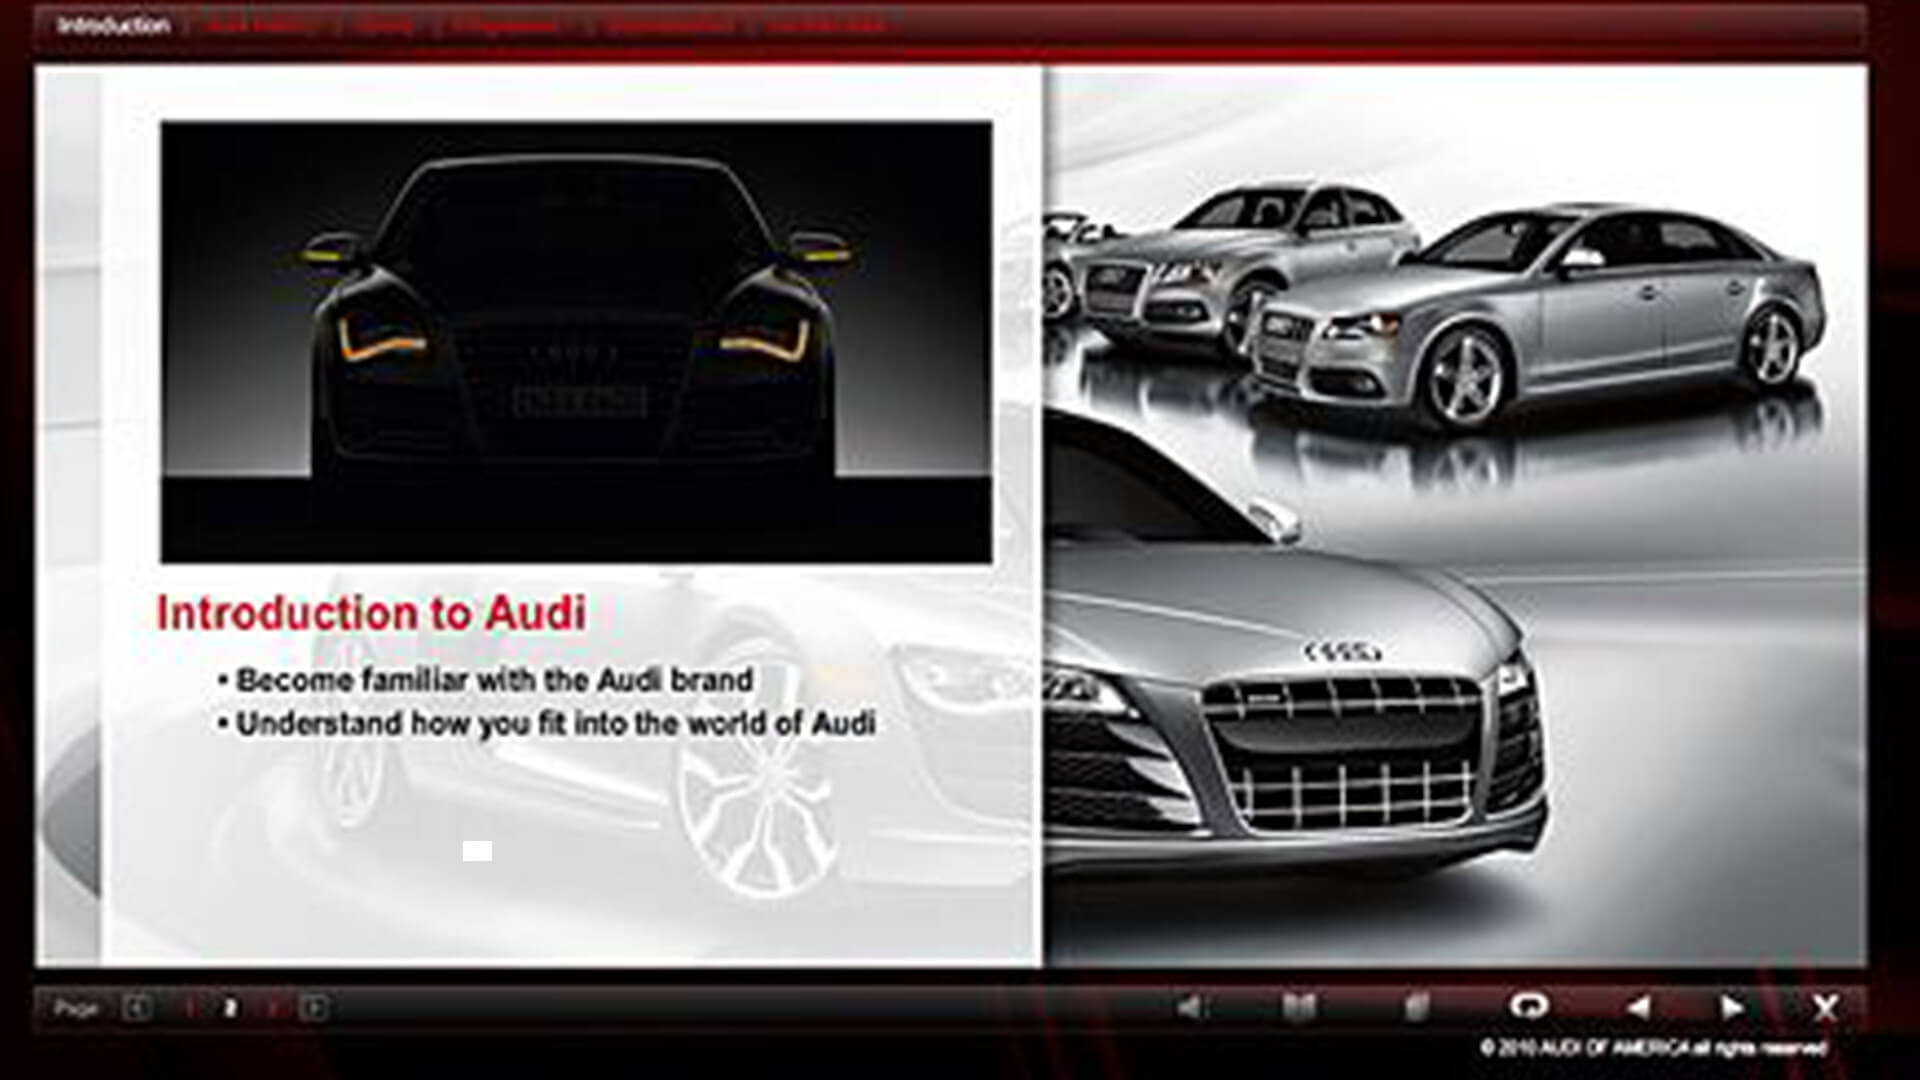 SG Launches Web Based Training for Audi